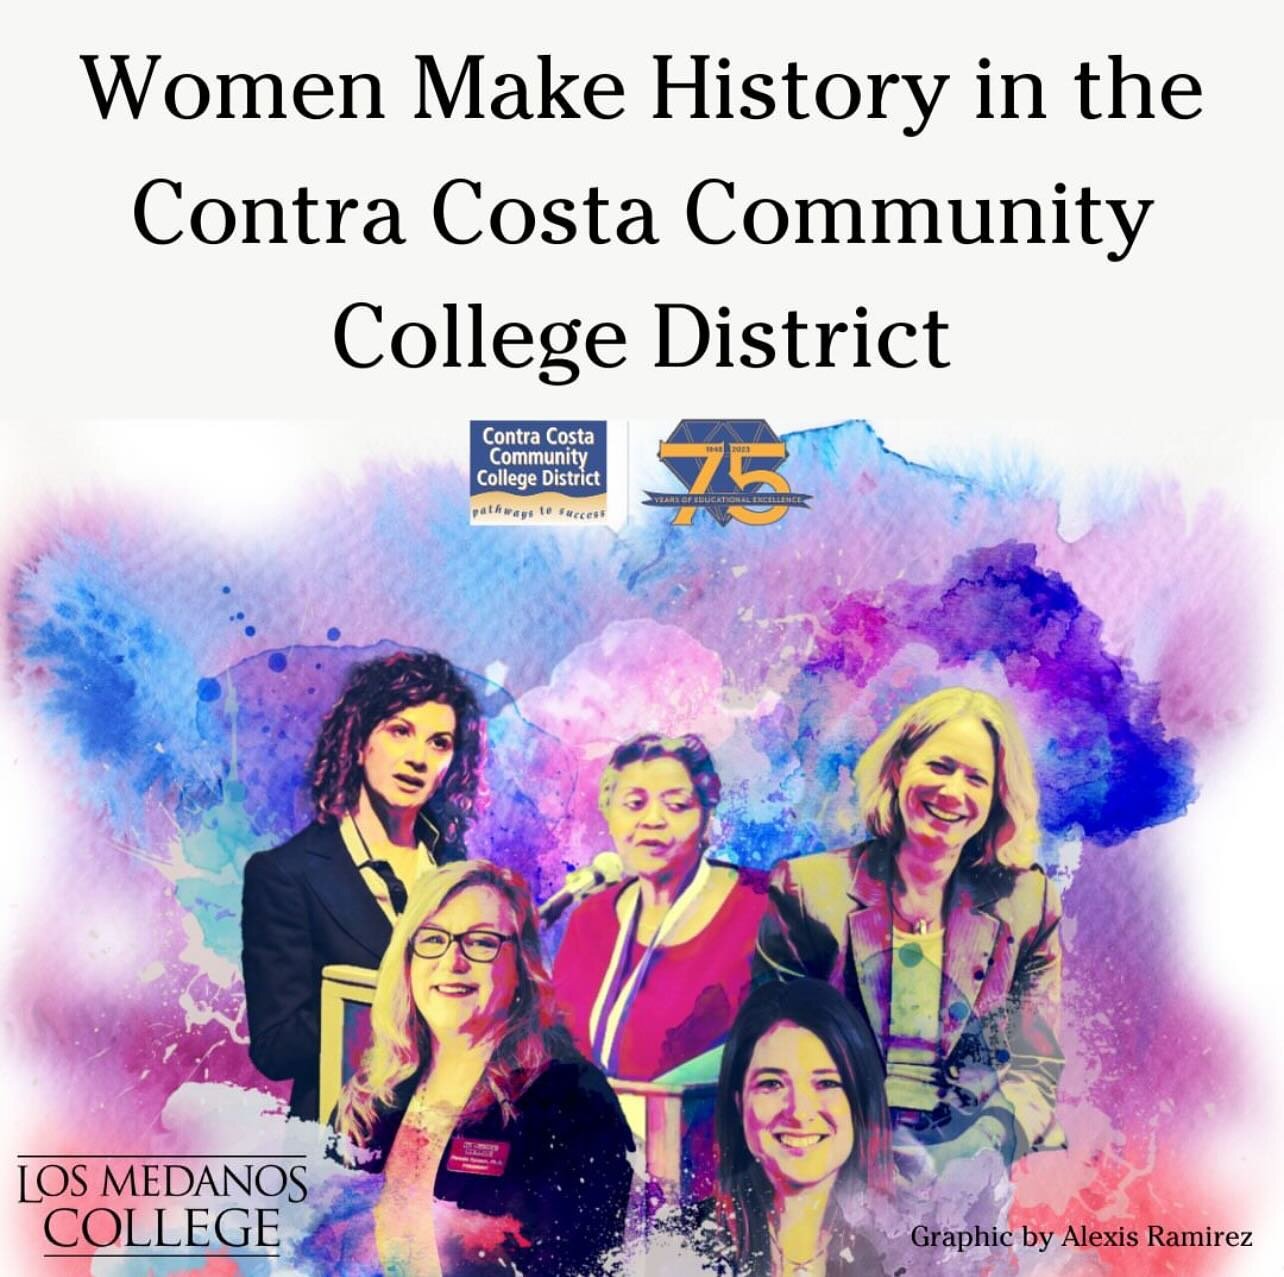 📰 Breaking News: Women make history in the @4cd_live - @lmc_experience 📰

For the first time in the Contra Costa Community College District&rsquo;s 75 years of service all senior leadership positions are filled by women!

Aliyah Ramirez, Editor-in-